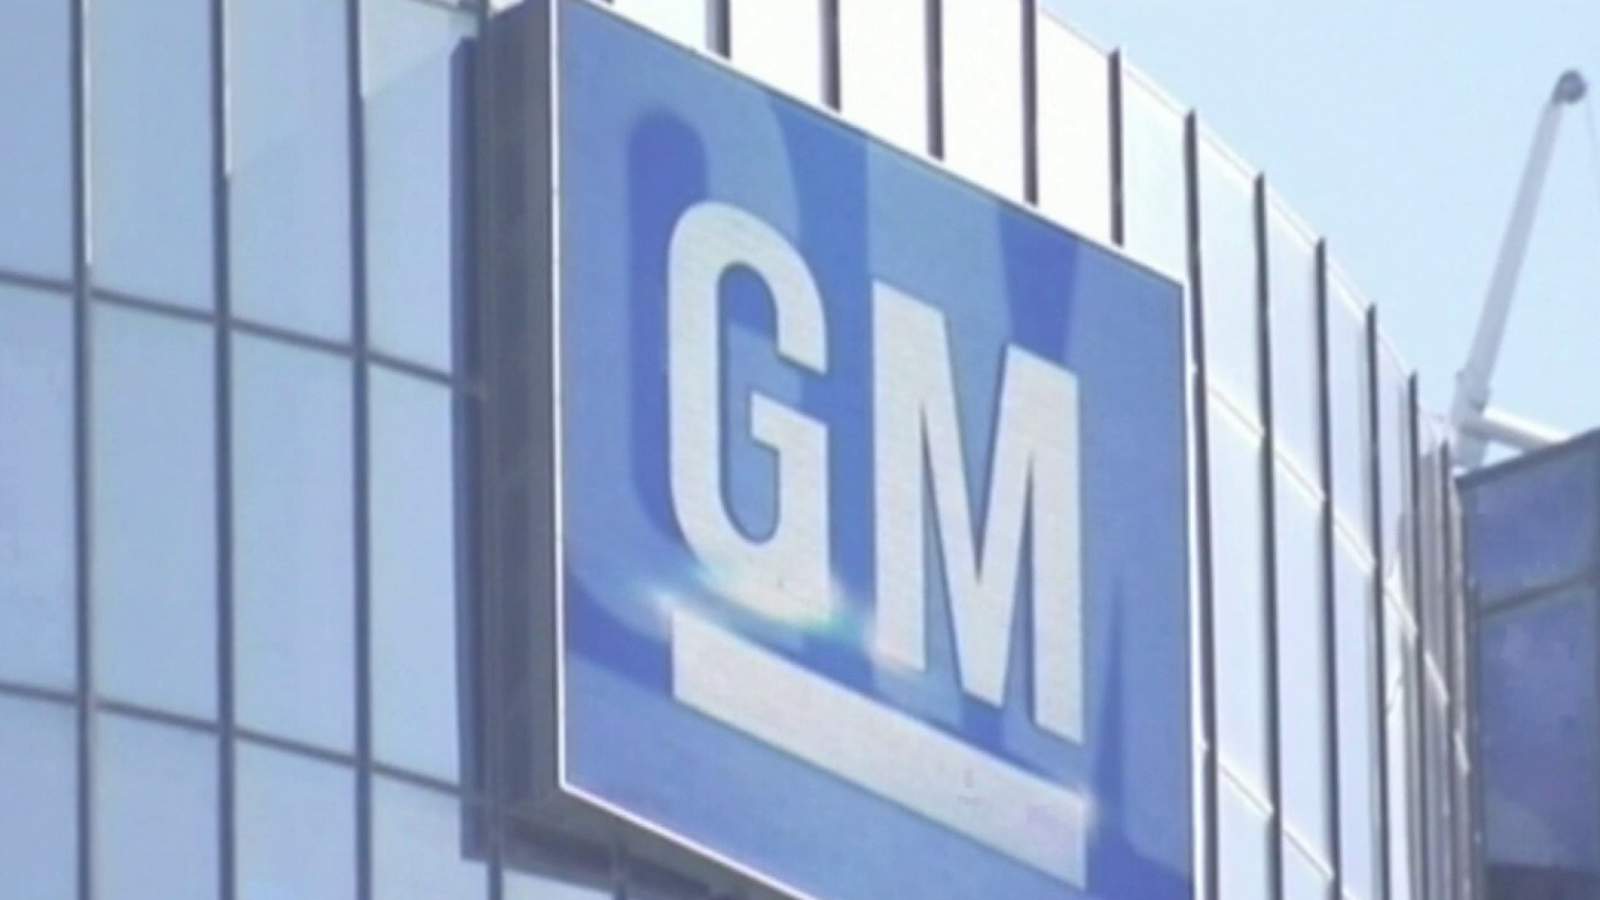 General Motors to recall nearly 7 million pickup trucks, SUVs to replace potentially dangerous Takata inflators - WDIV ClickOnDetroit